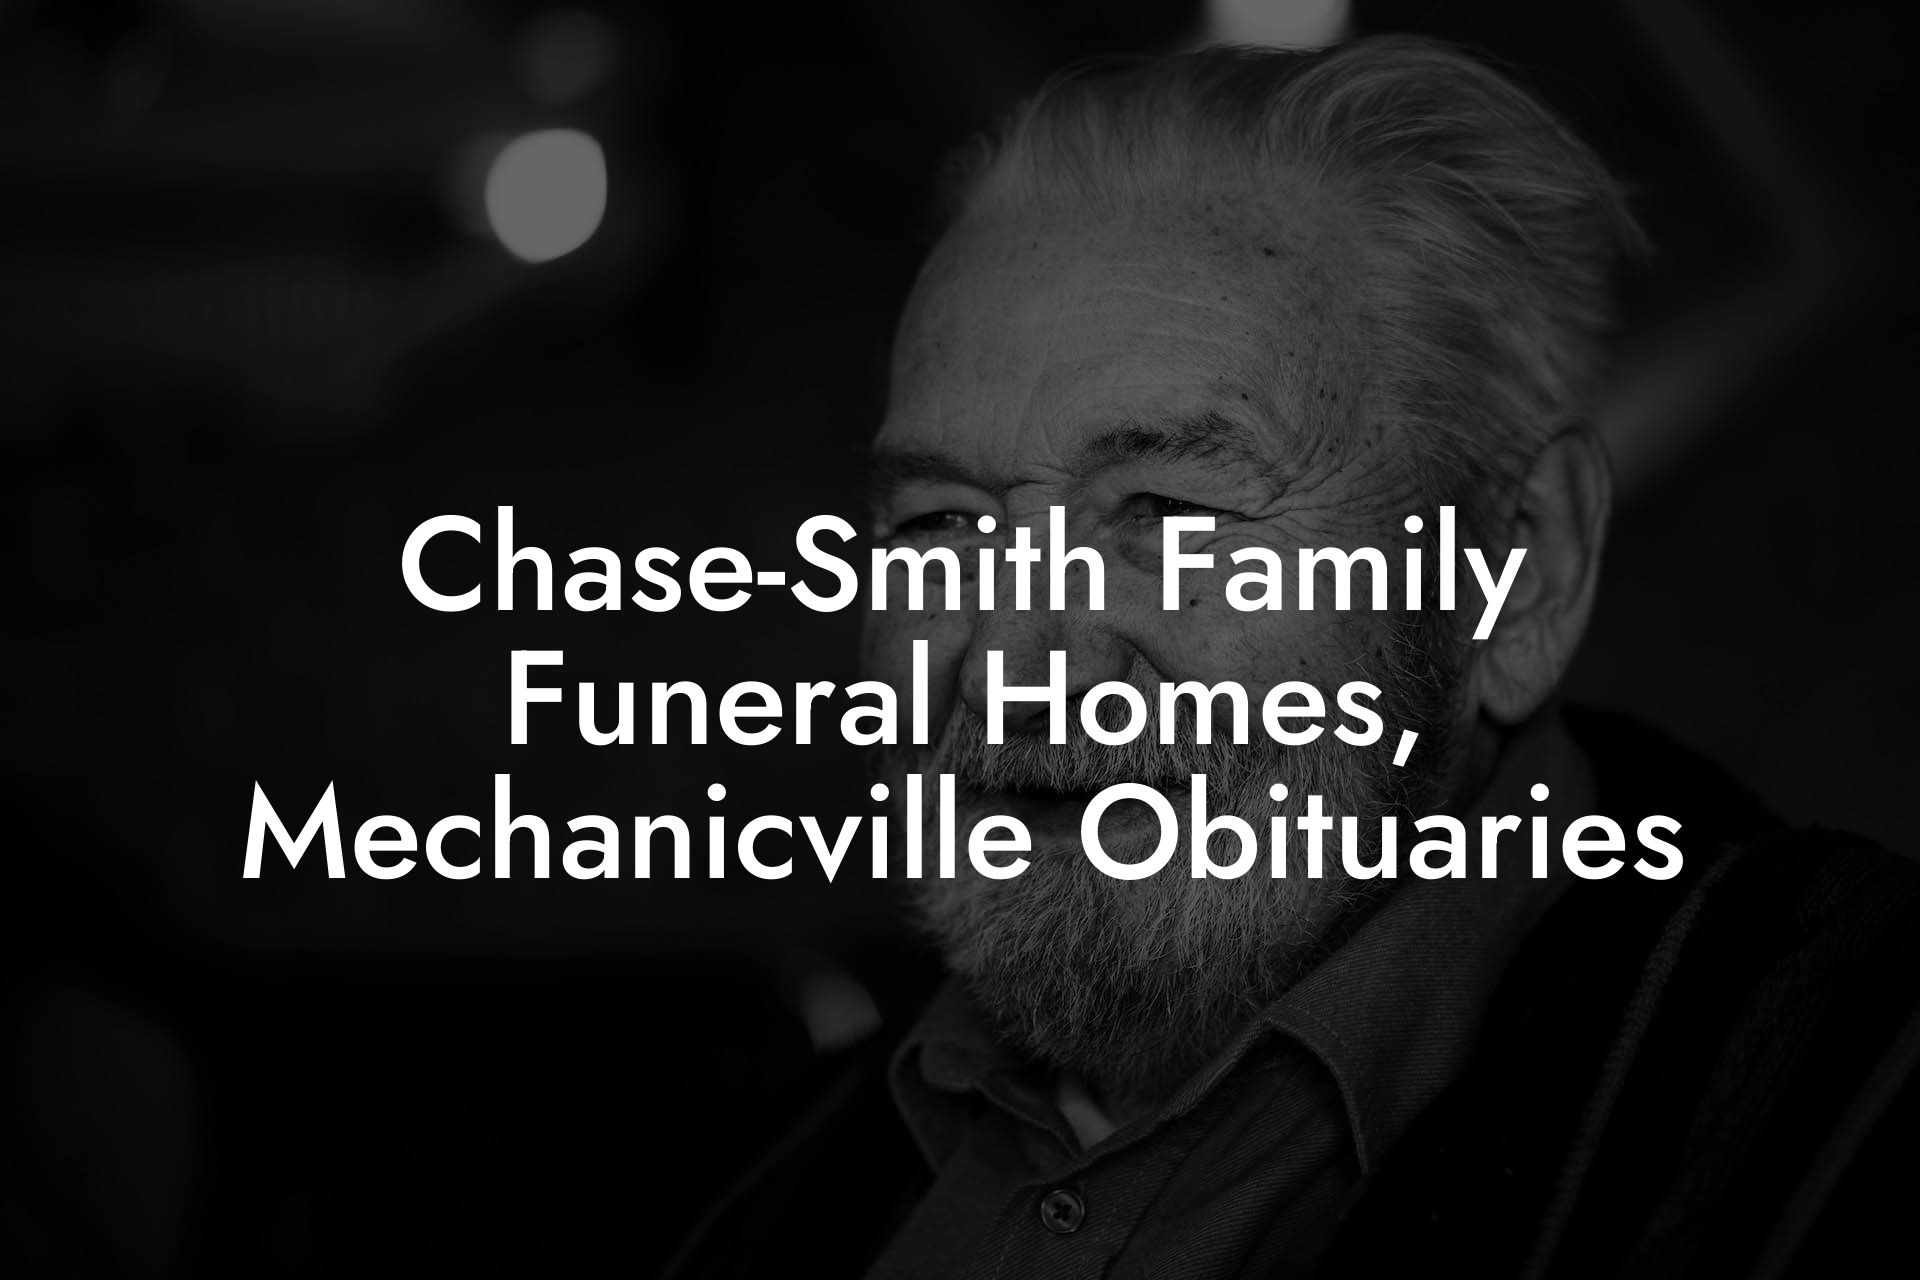 Chase-Smith Family Funeral Homes, Mechanicville Obituaries